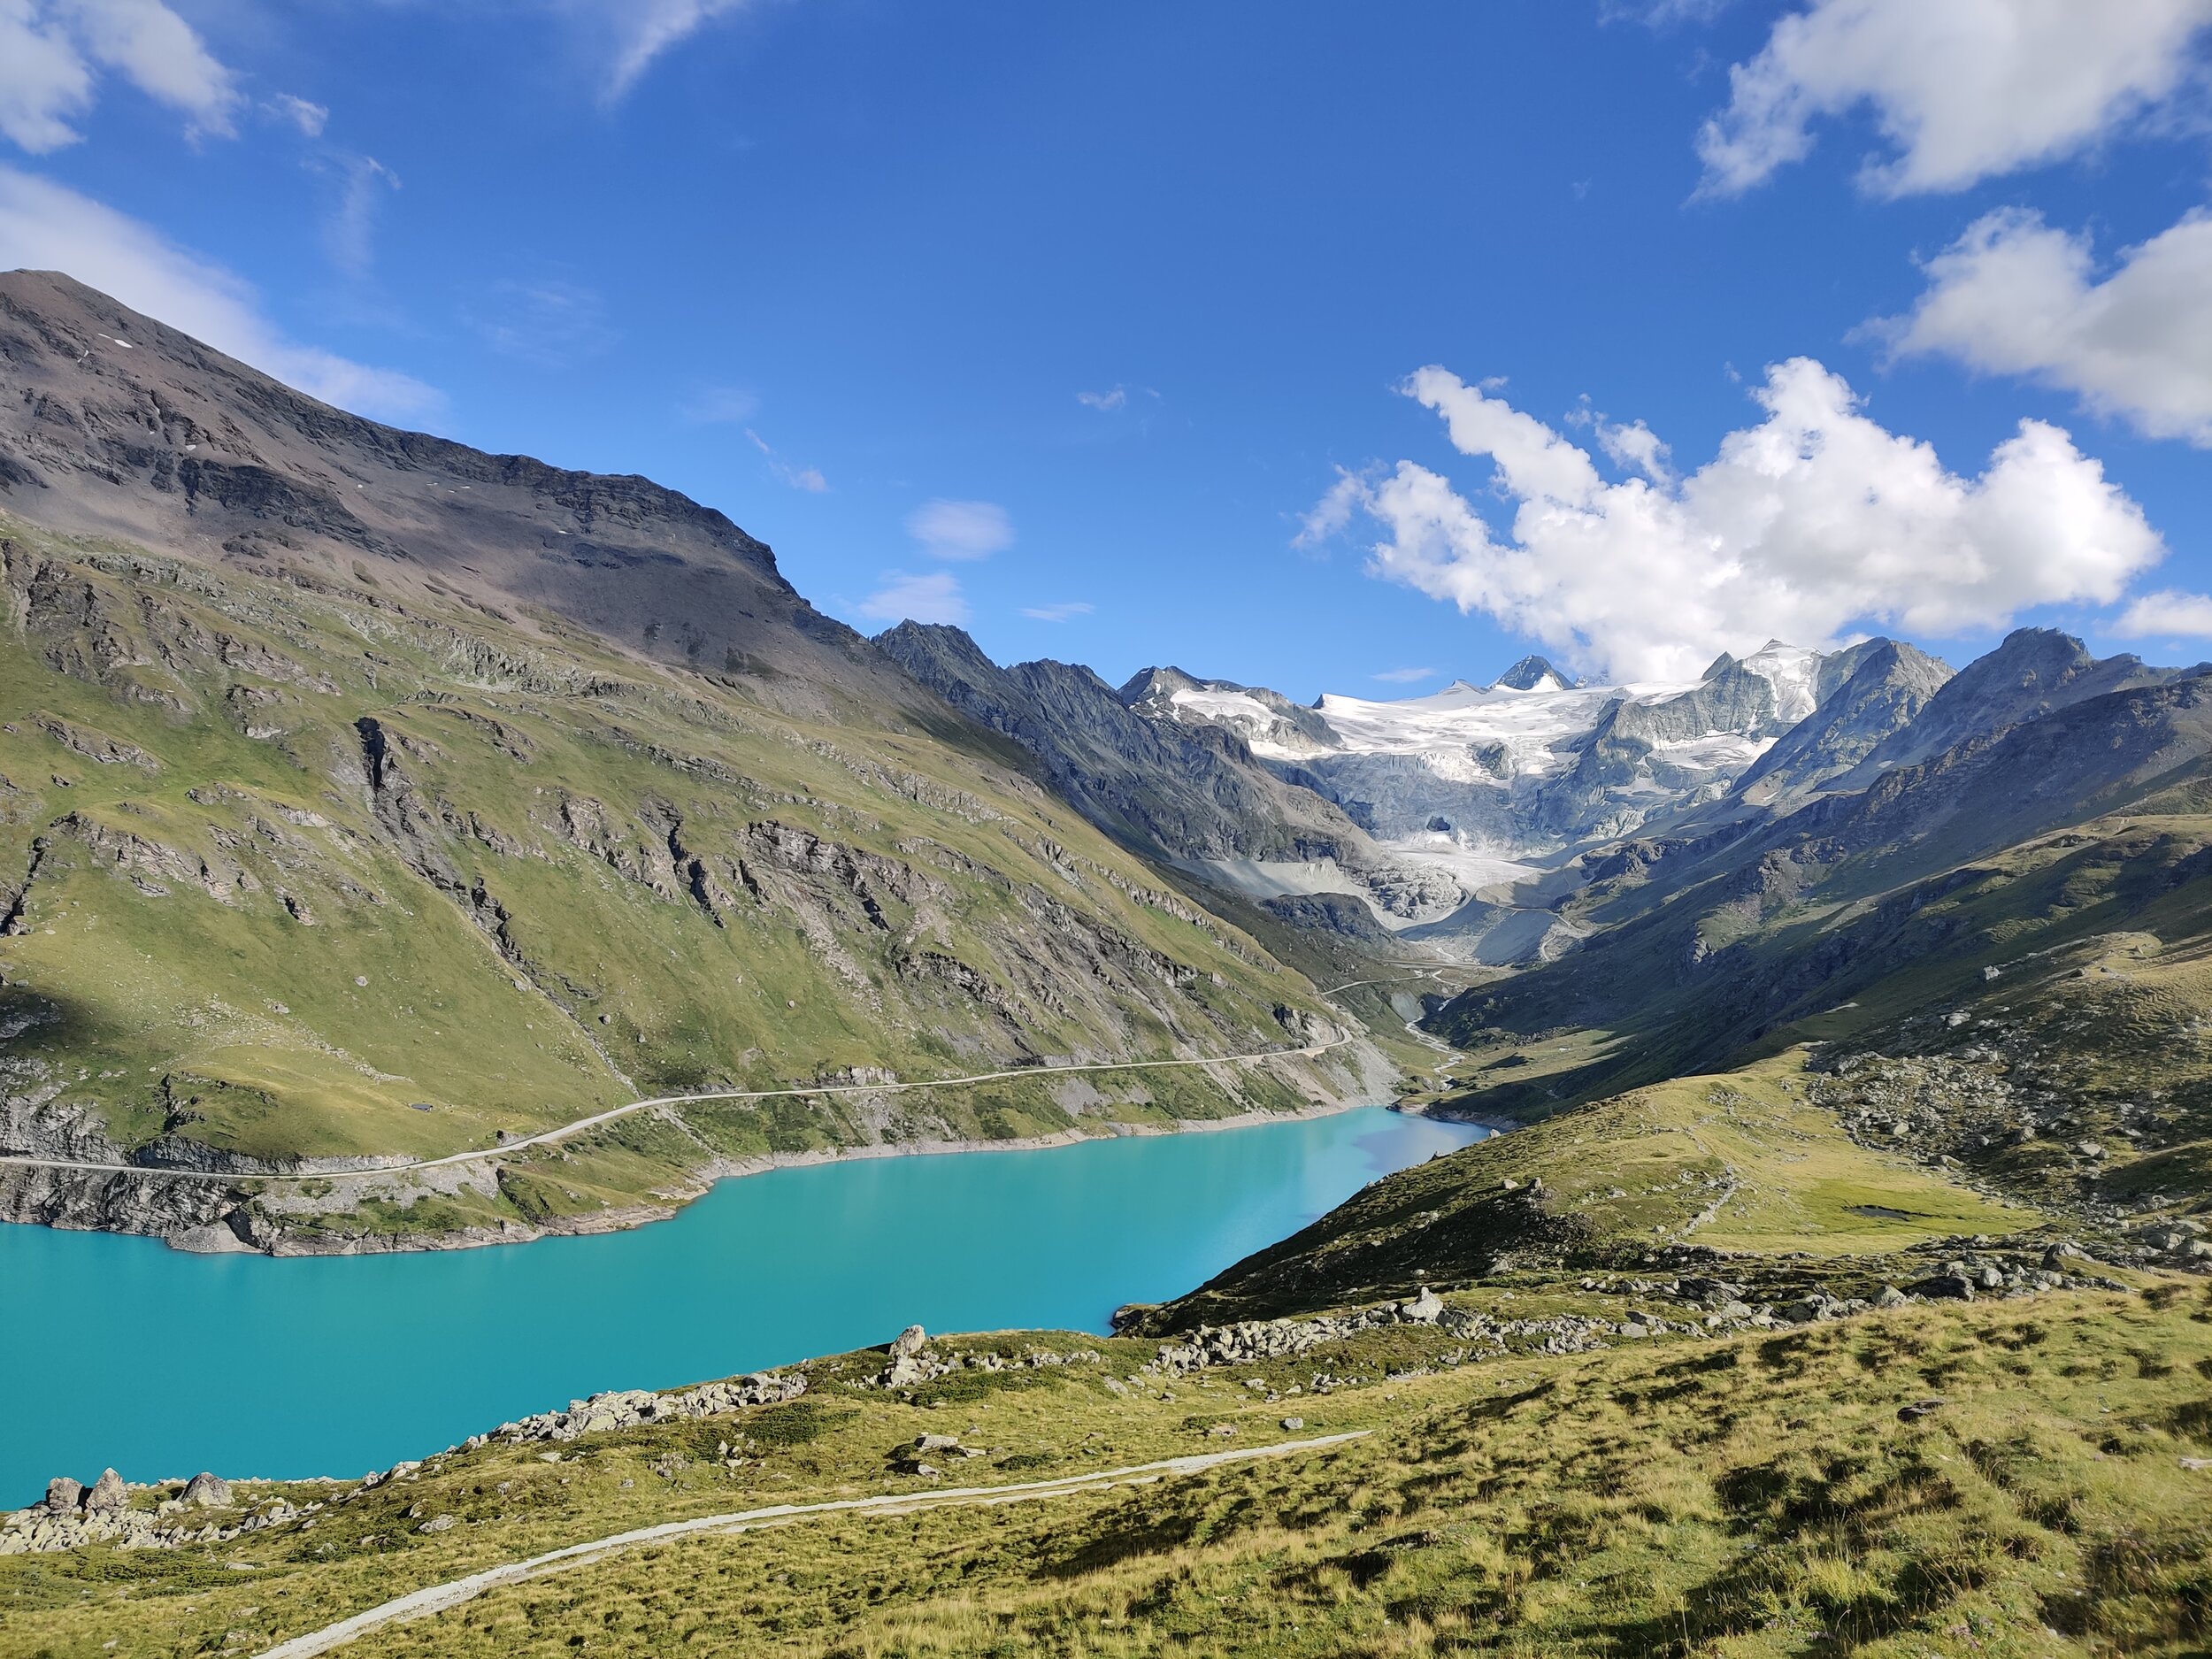 Lac Moiry and the Moiry glacier